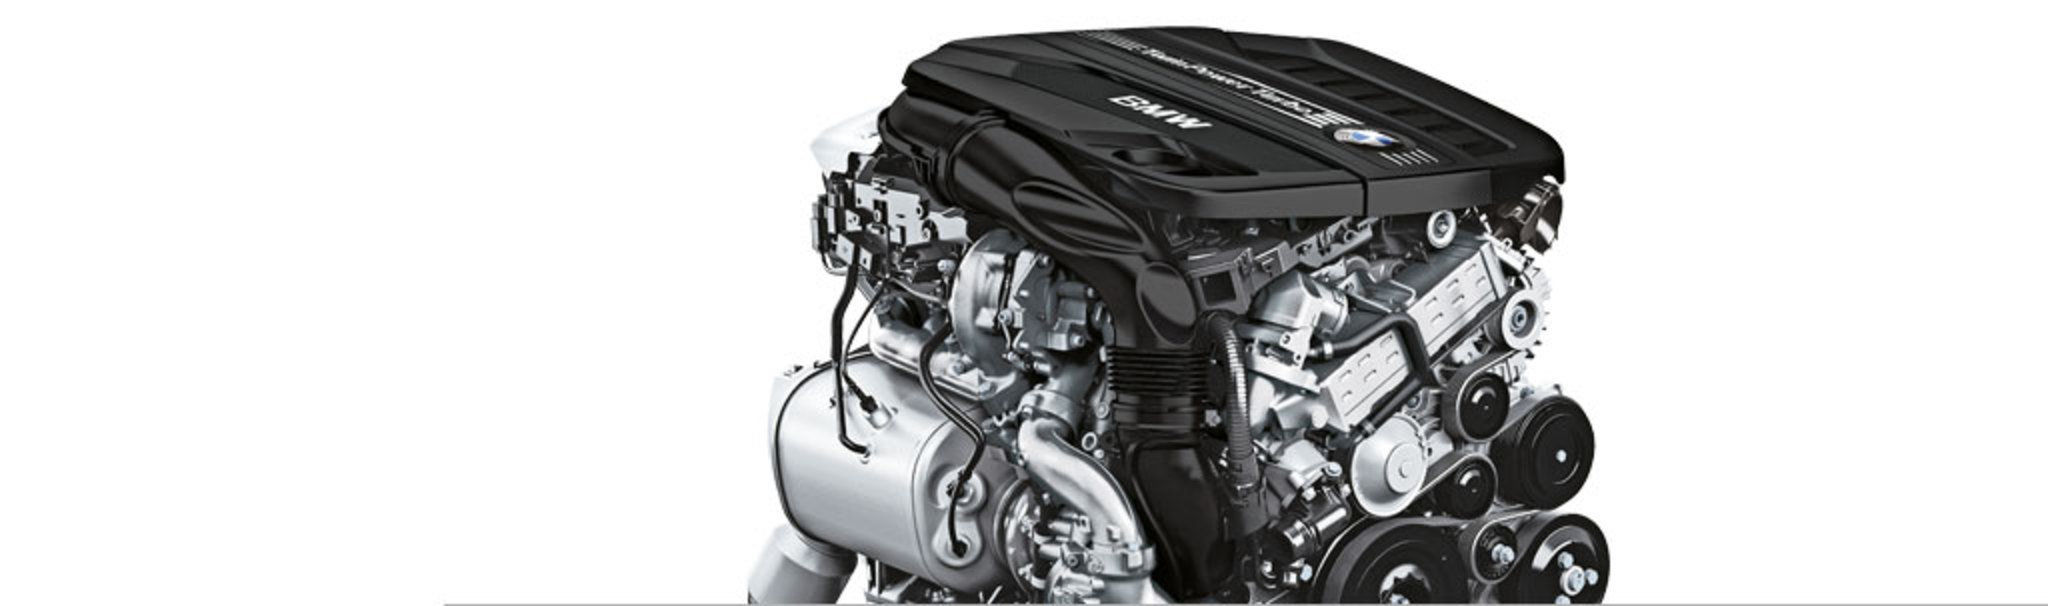 The six-cylinder diesel engines in the. BMW X6 xDrive 30d and xDrive 40d.